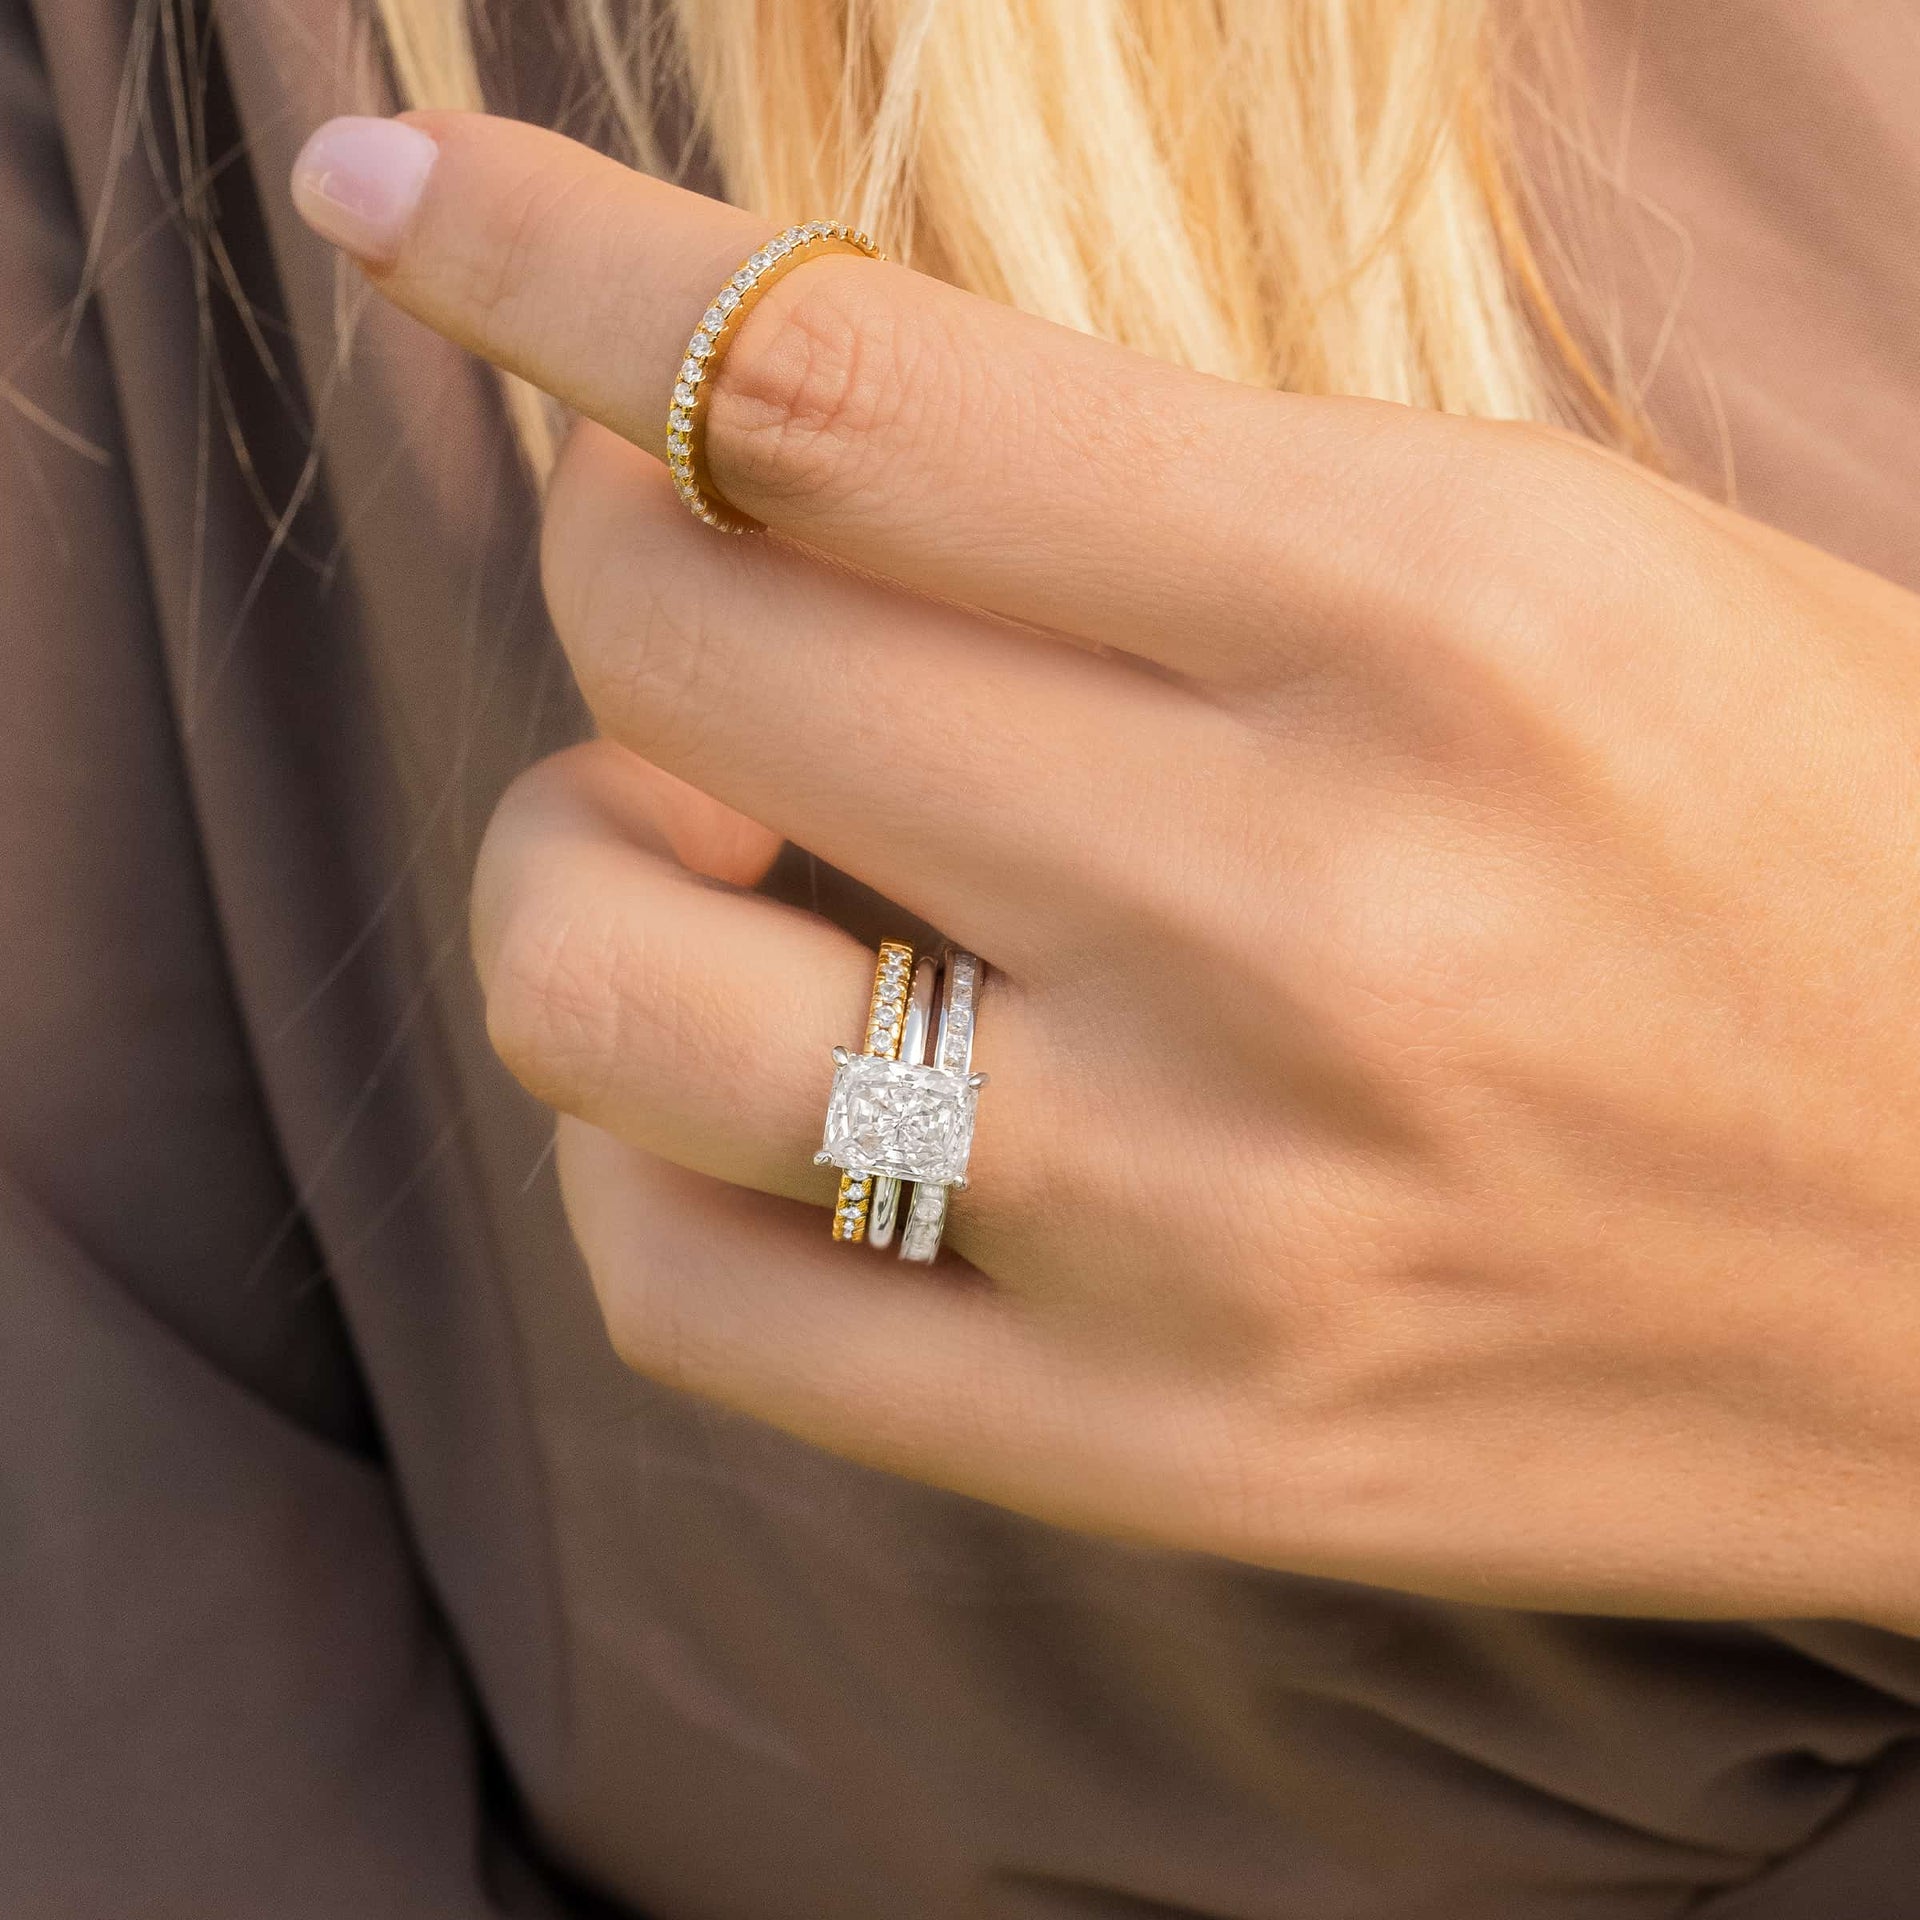 woman wearing silver engagement ring with gold and silver wedding bands